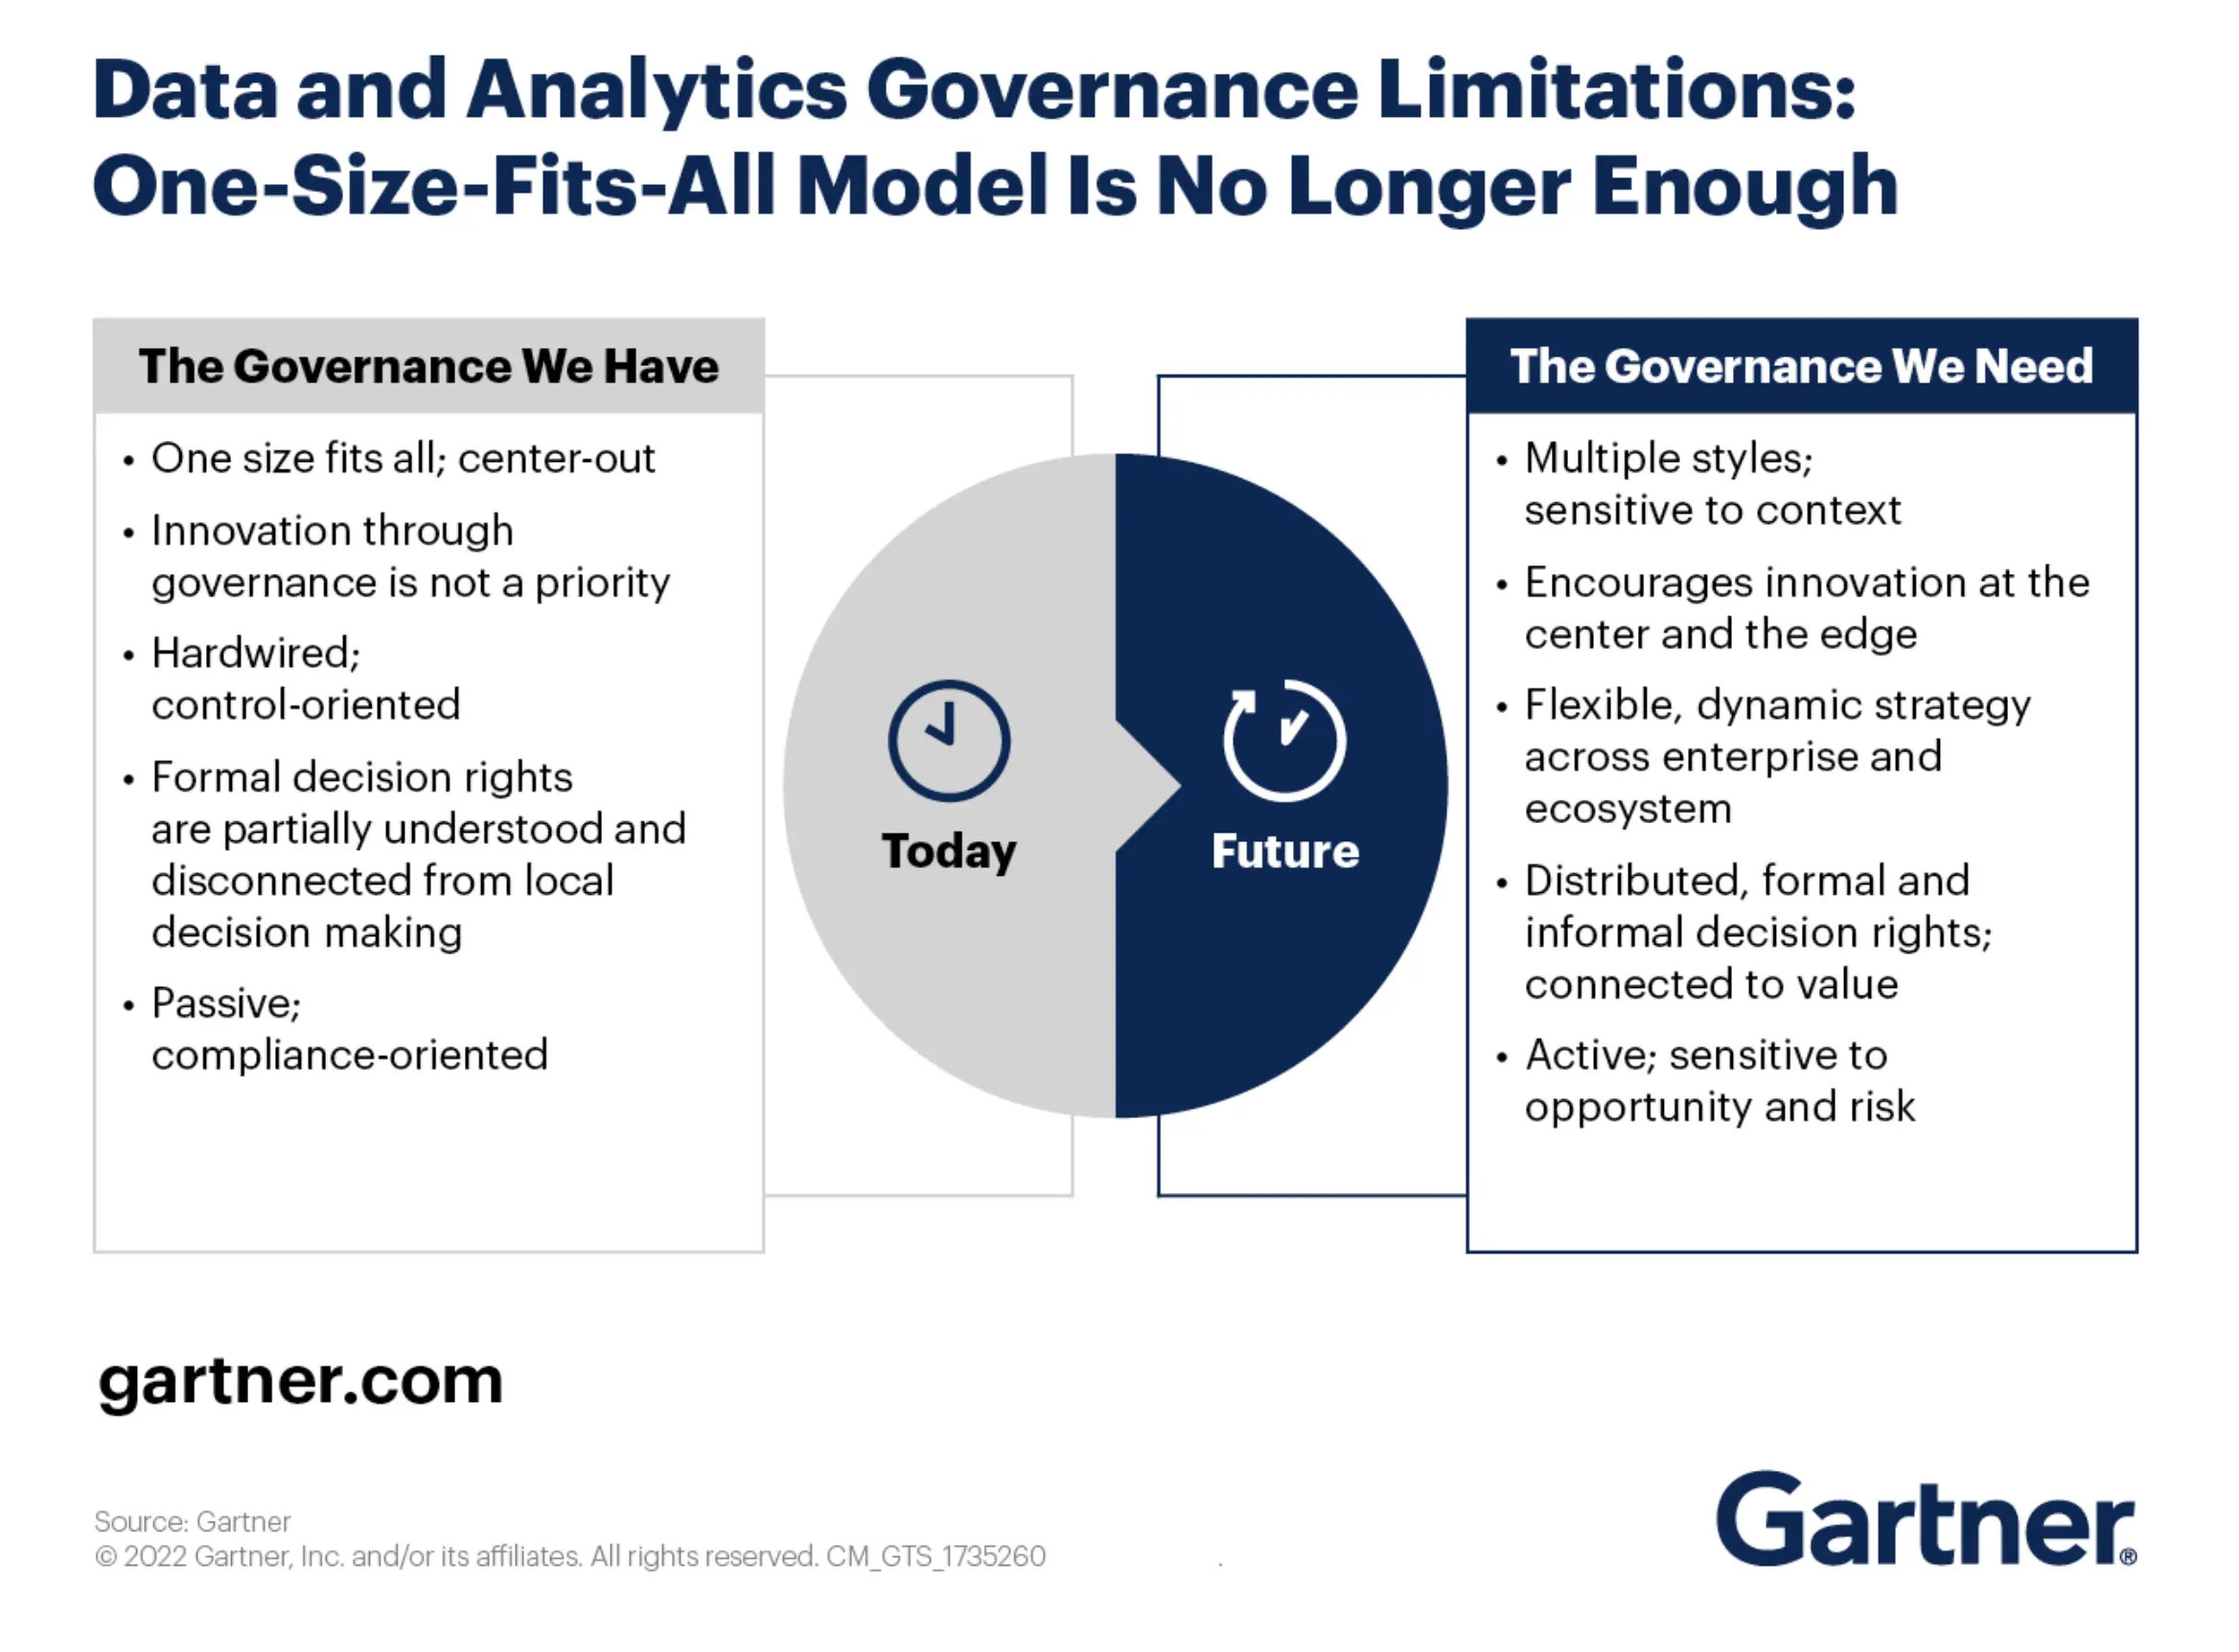 Modern data stack requires a paradigm shift in thinking about data governance. Source: Atlan